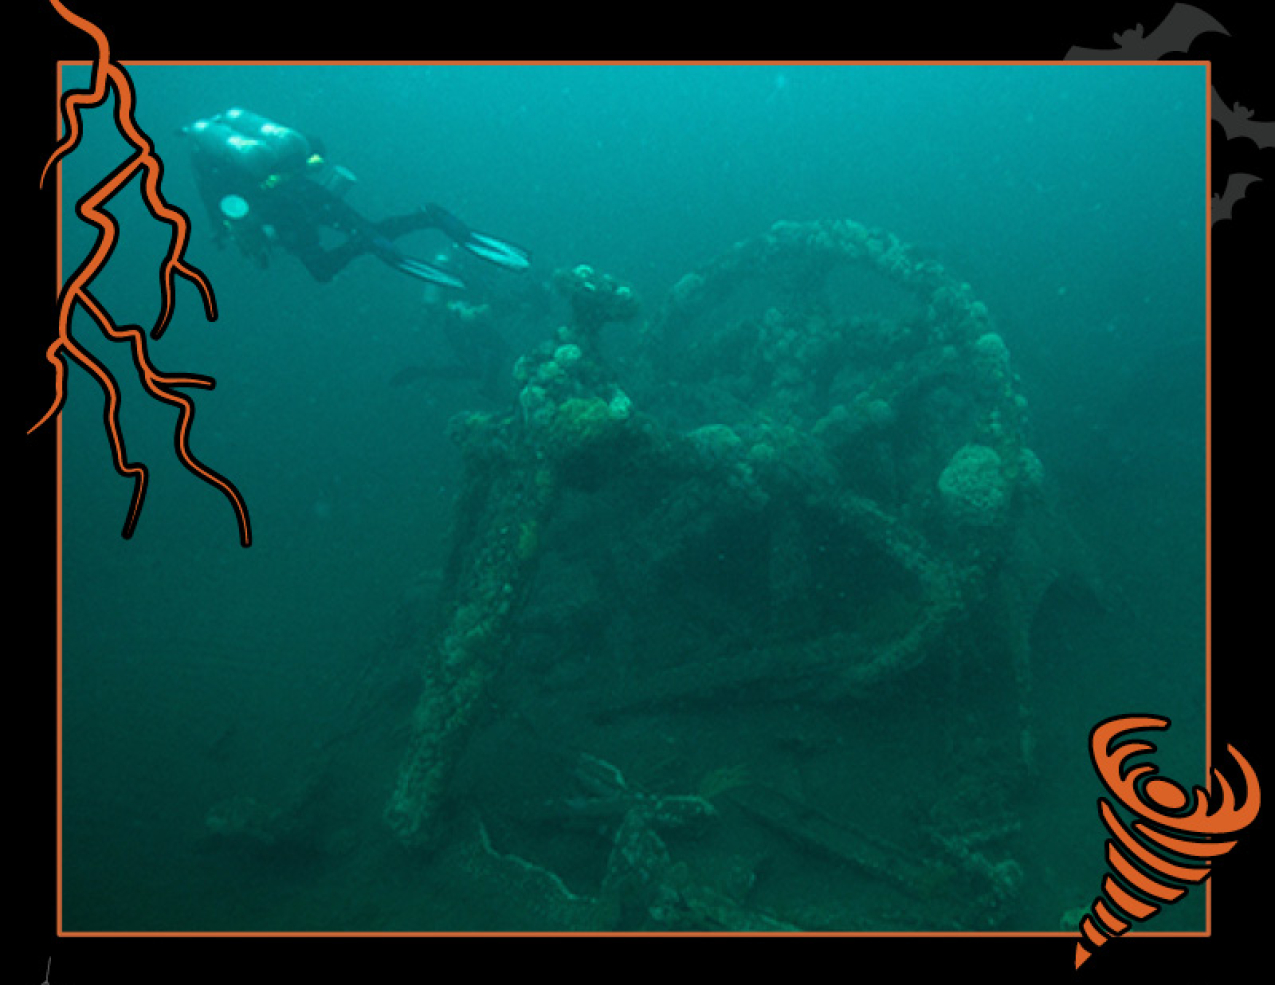 Stern section of City of Atlanta shipwreck. Border of the photo is black with orange sea creature graphics of octopus tentacles and a fish skeleton. Text: Exploring shipwrecks, #NOAASpookyScience with NOAA logo.